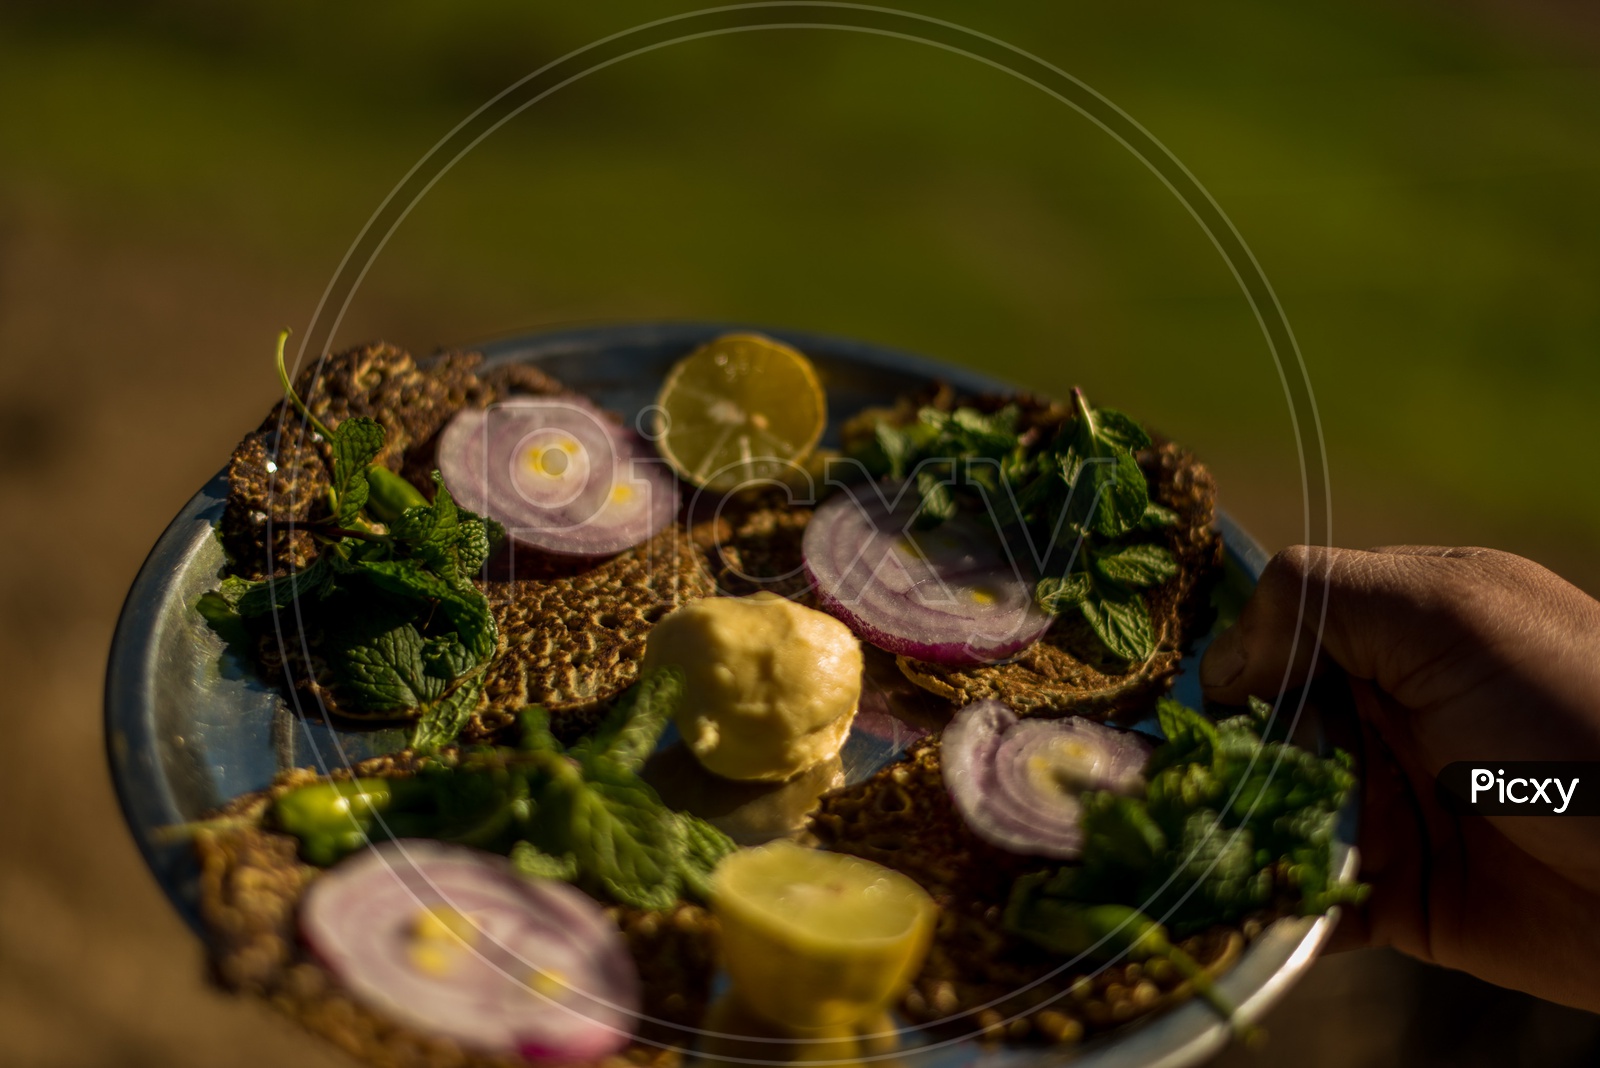 Authentic Himachali food garnished with Onions and Pudina